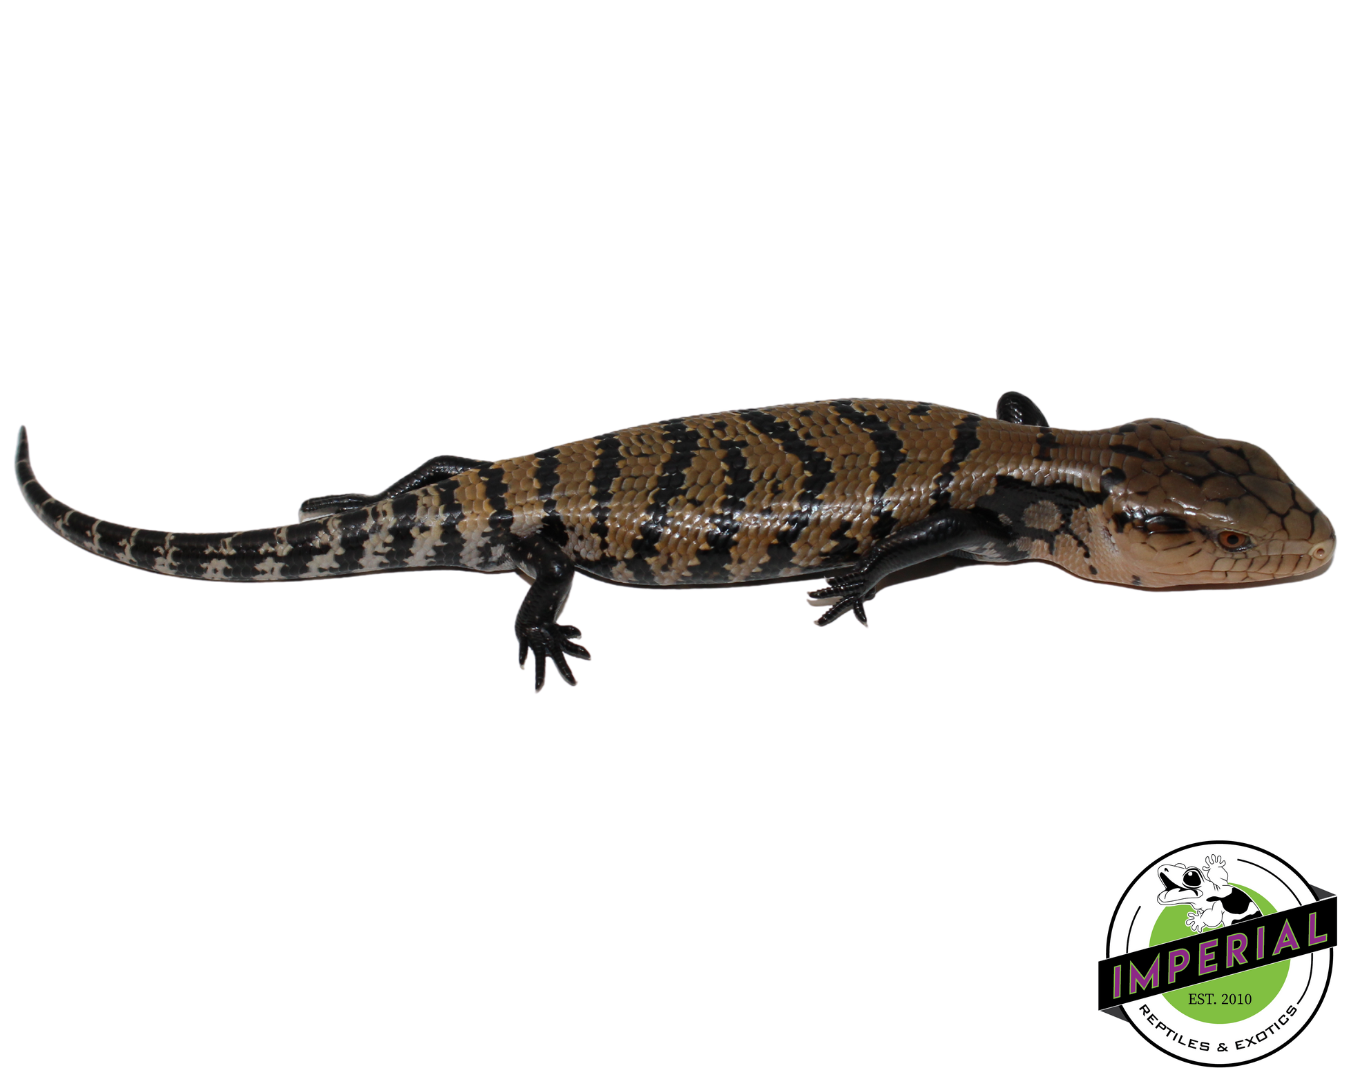 indonesian blue tongue skink for sale, buy reptiles online